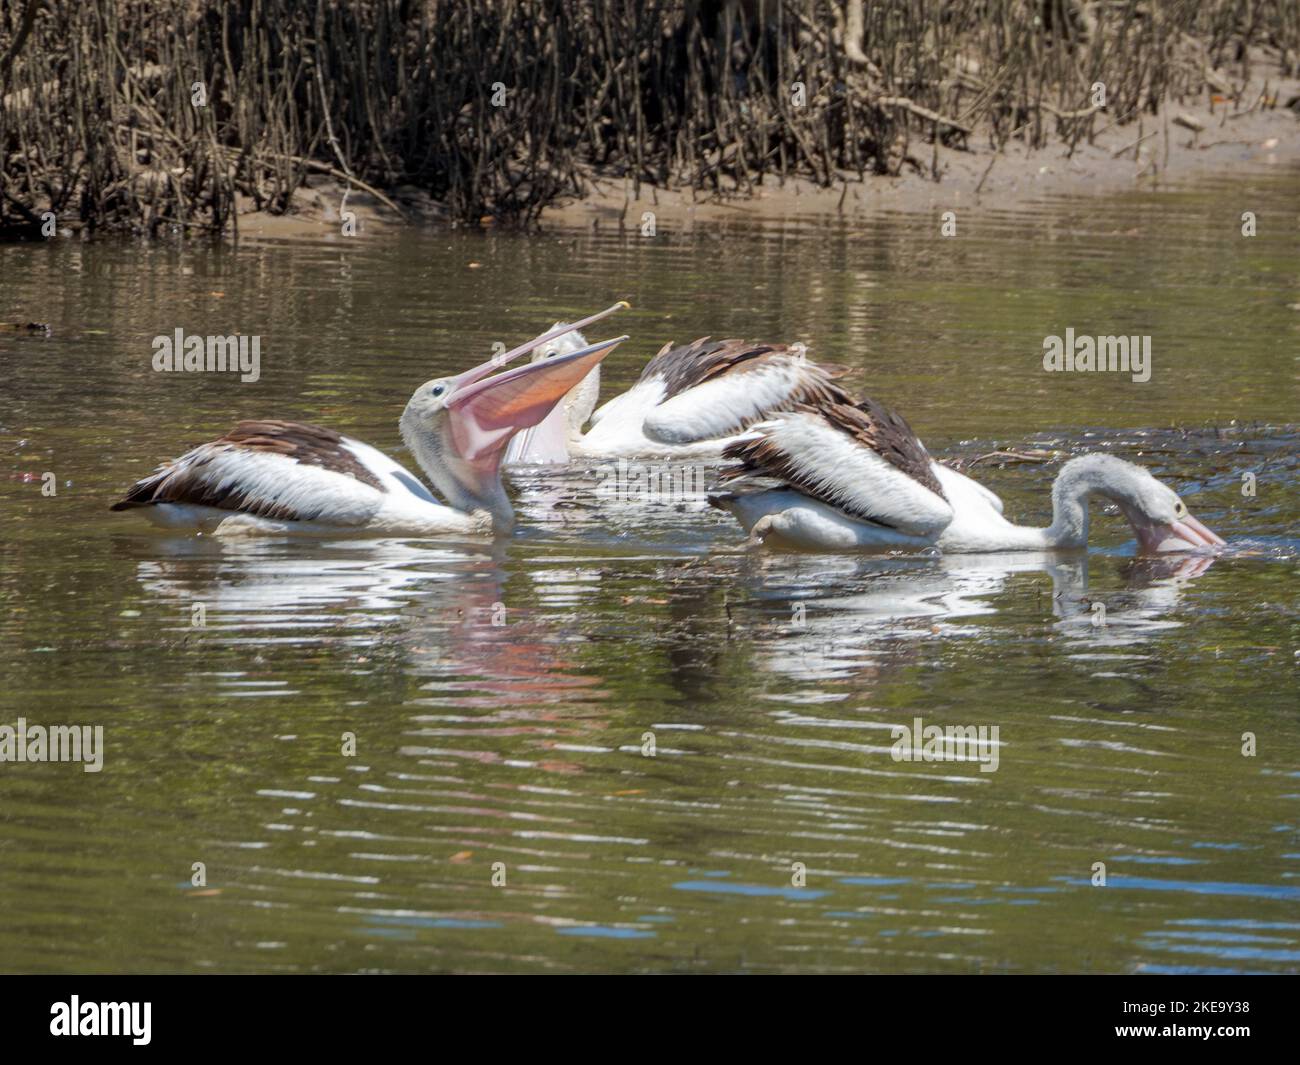 Pelicans eating and feeding on the river near some mangroves, one with its mouth open, Australia Stock Photo